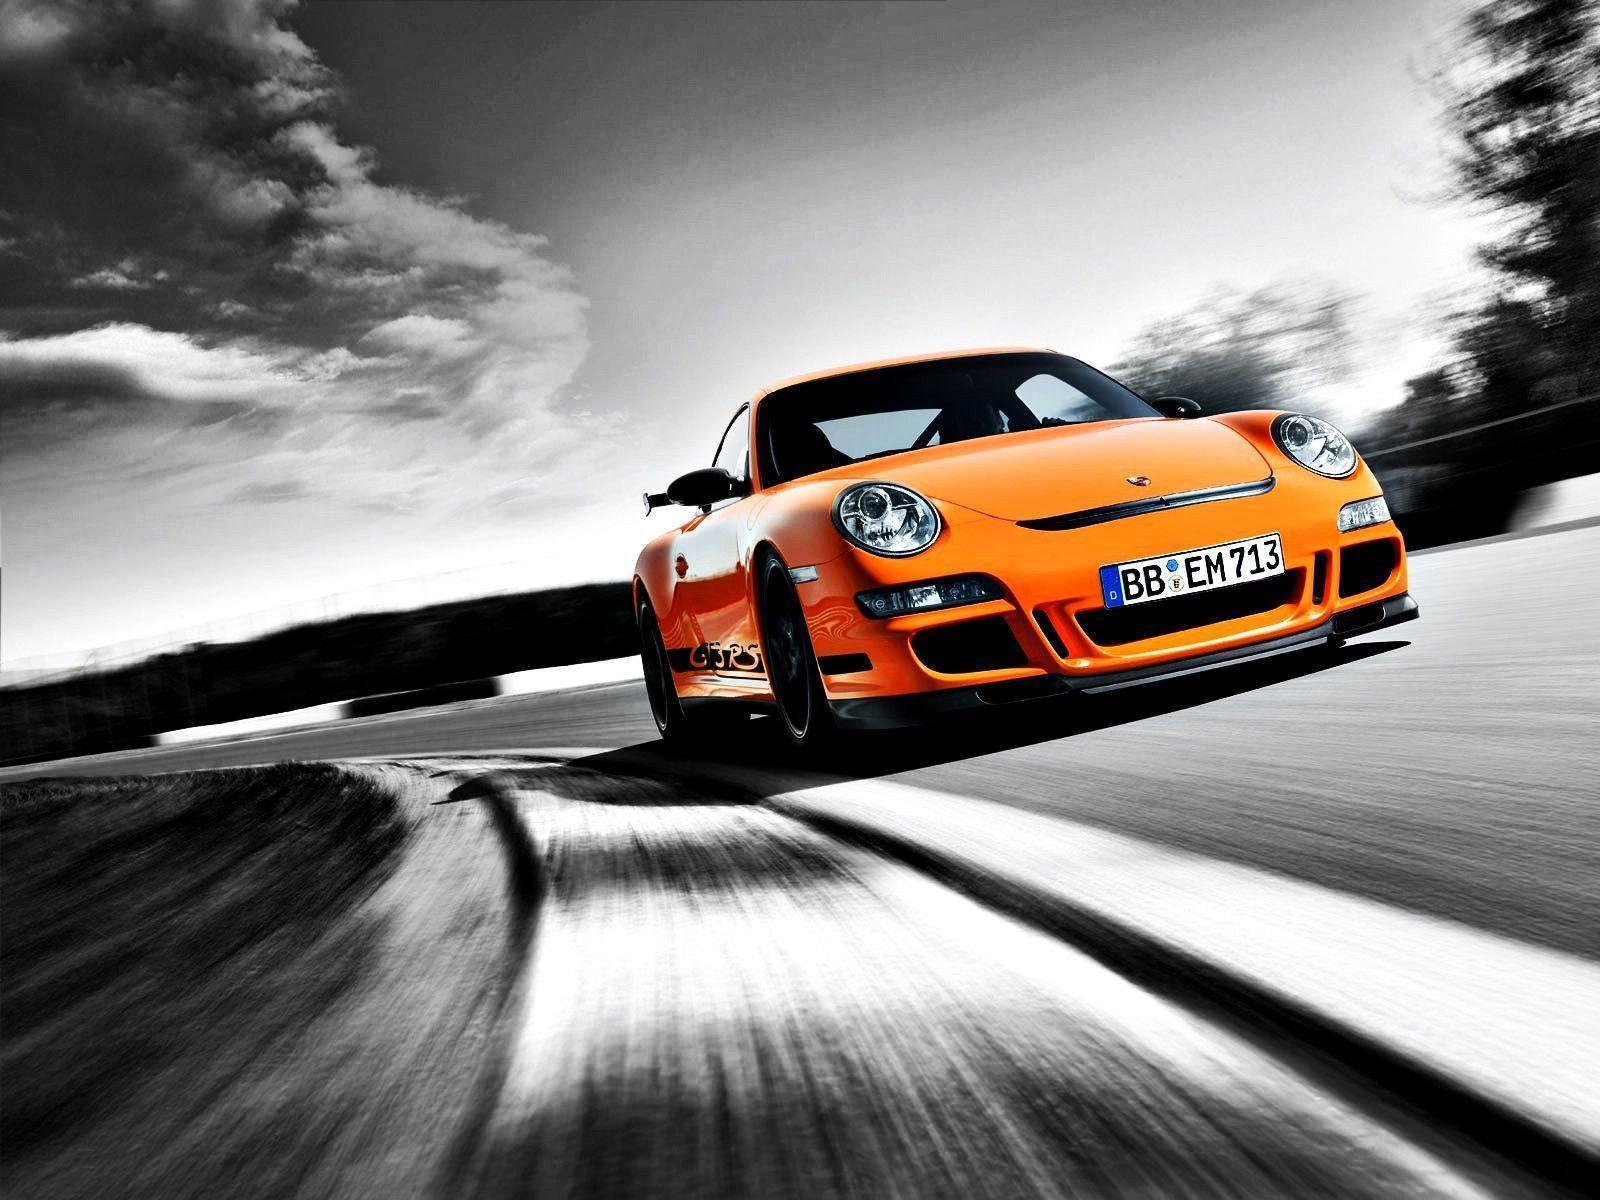 Car Wallpaper Why They Are a Good Choice for Desktops